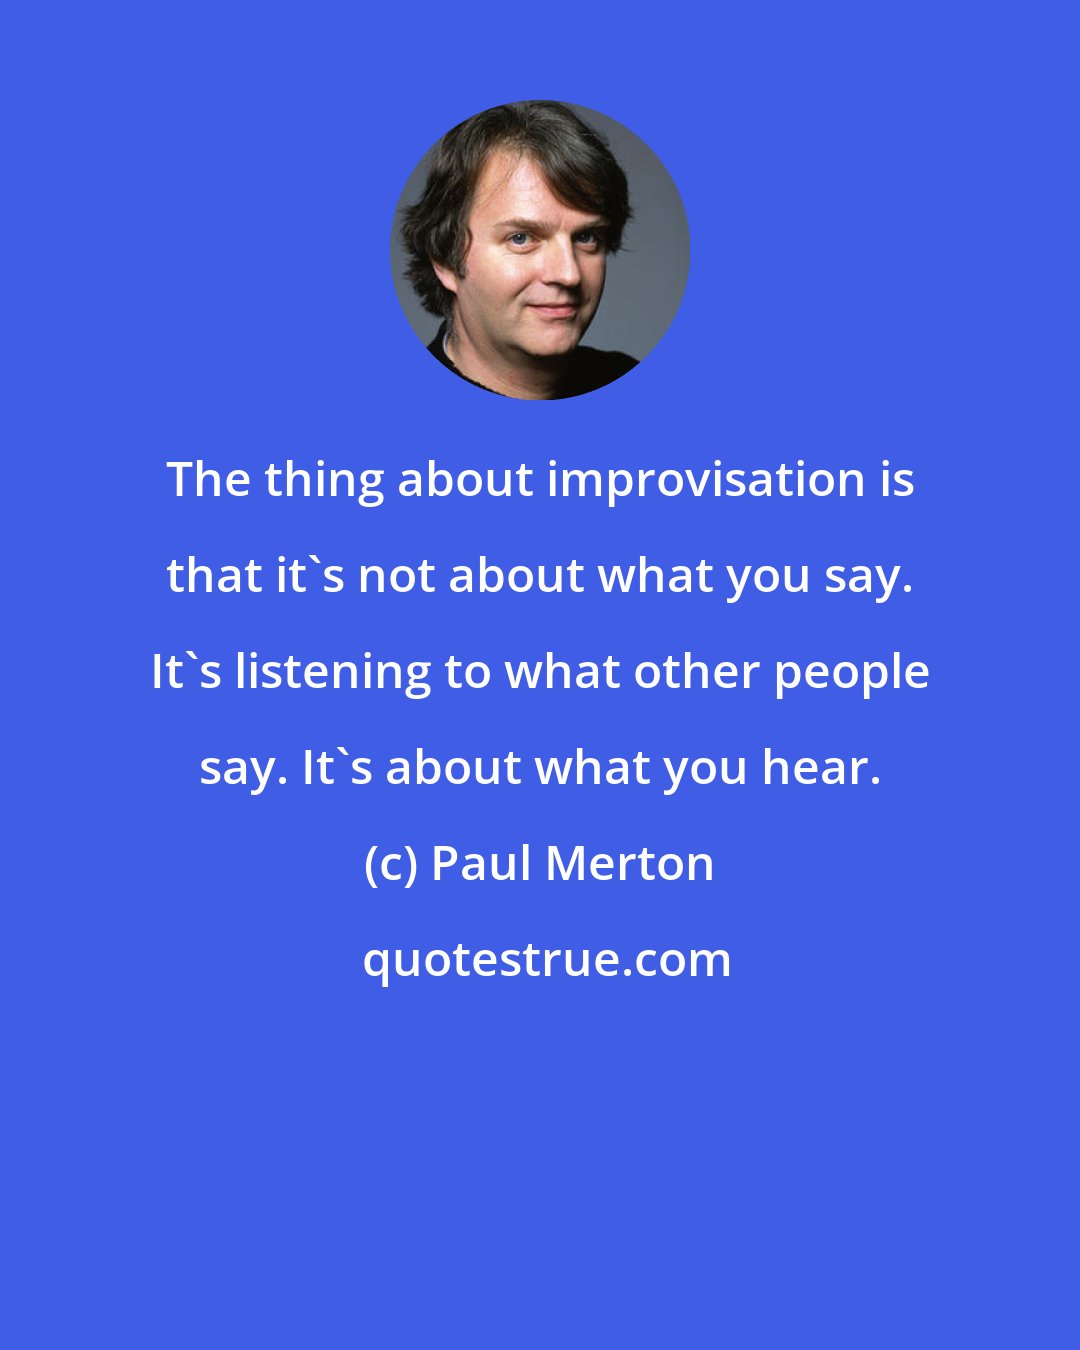 Paul Merton: The thing about improvisation is that it's not about what you say. It's listening to what other people say. It's about what you hear.